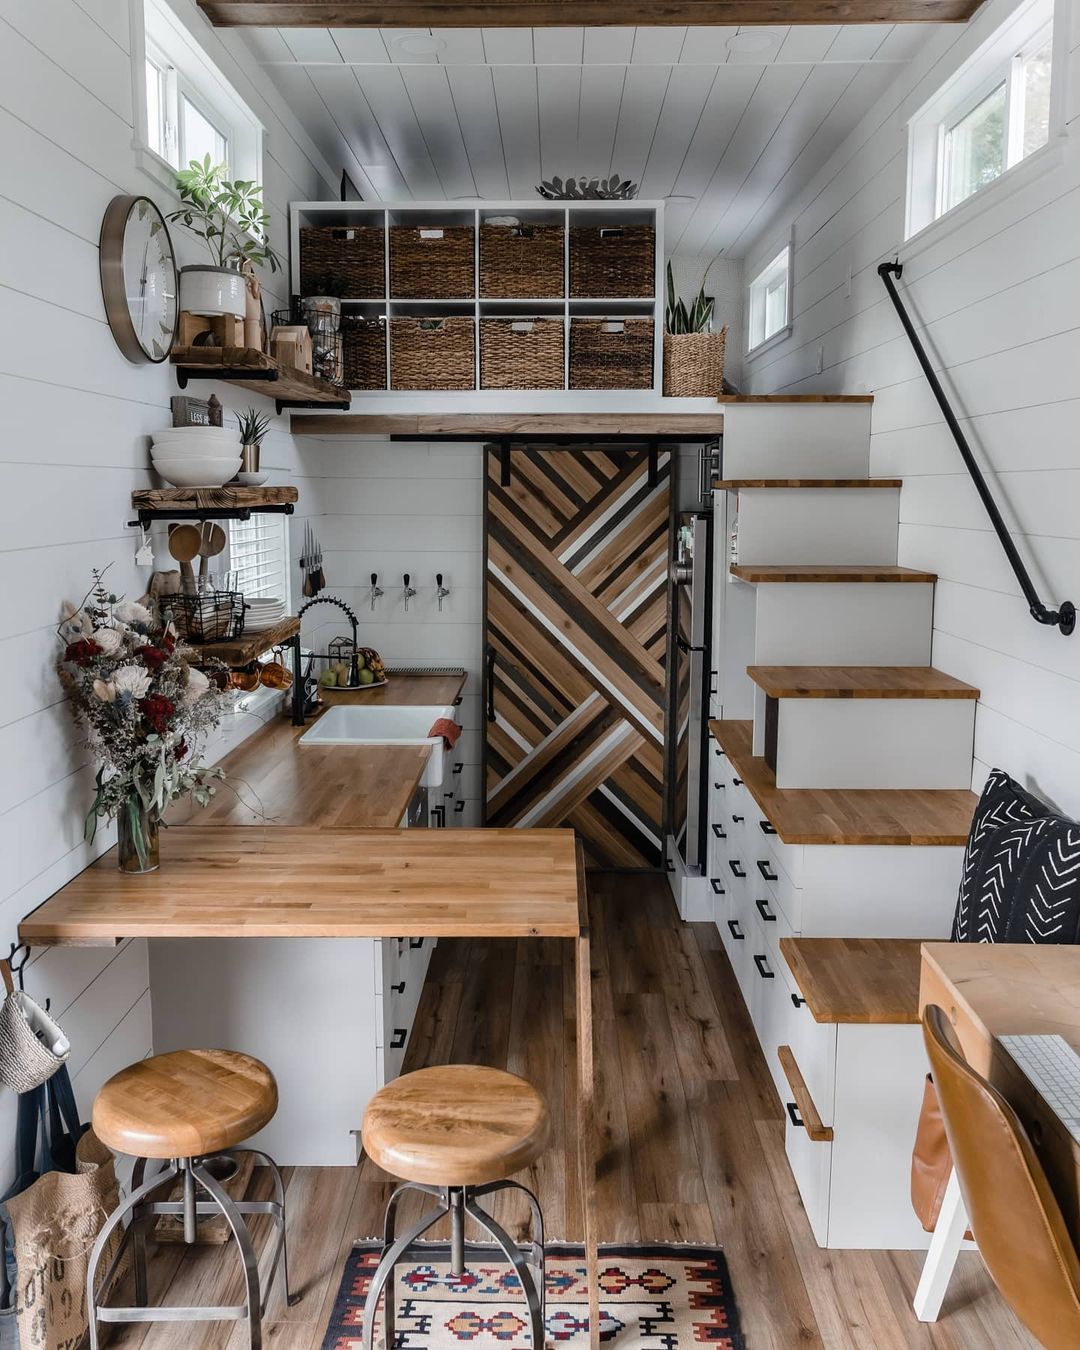 Interior of a shipping container home that includes a kitchen, staircase, and storage area. Photo by instagram user @tinyhomiez